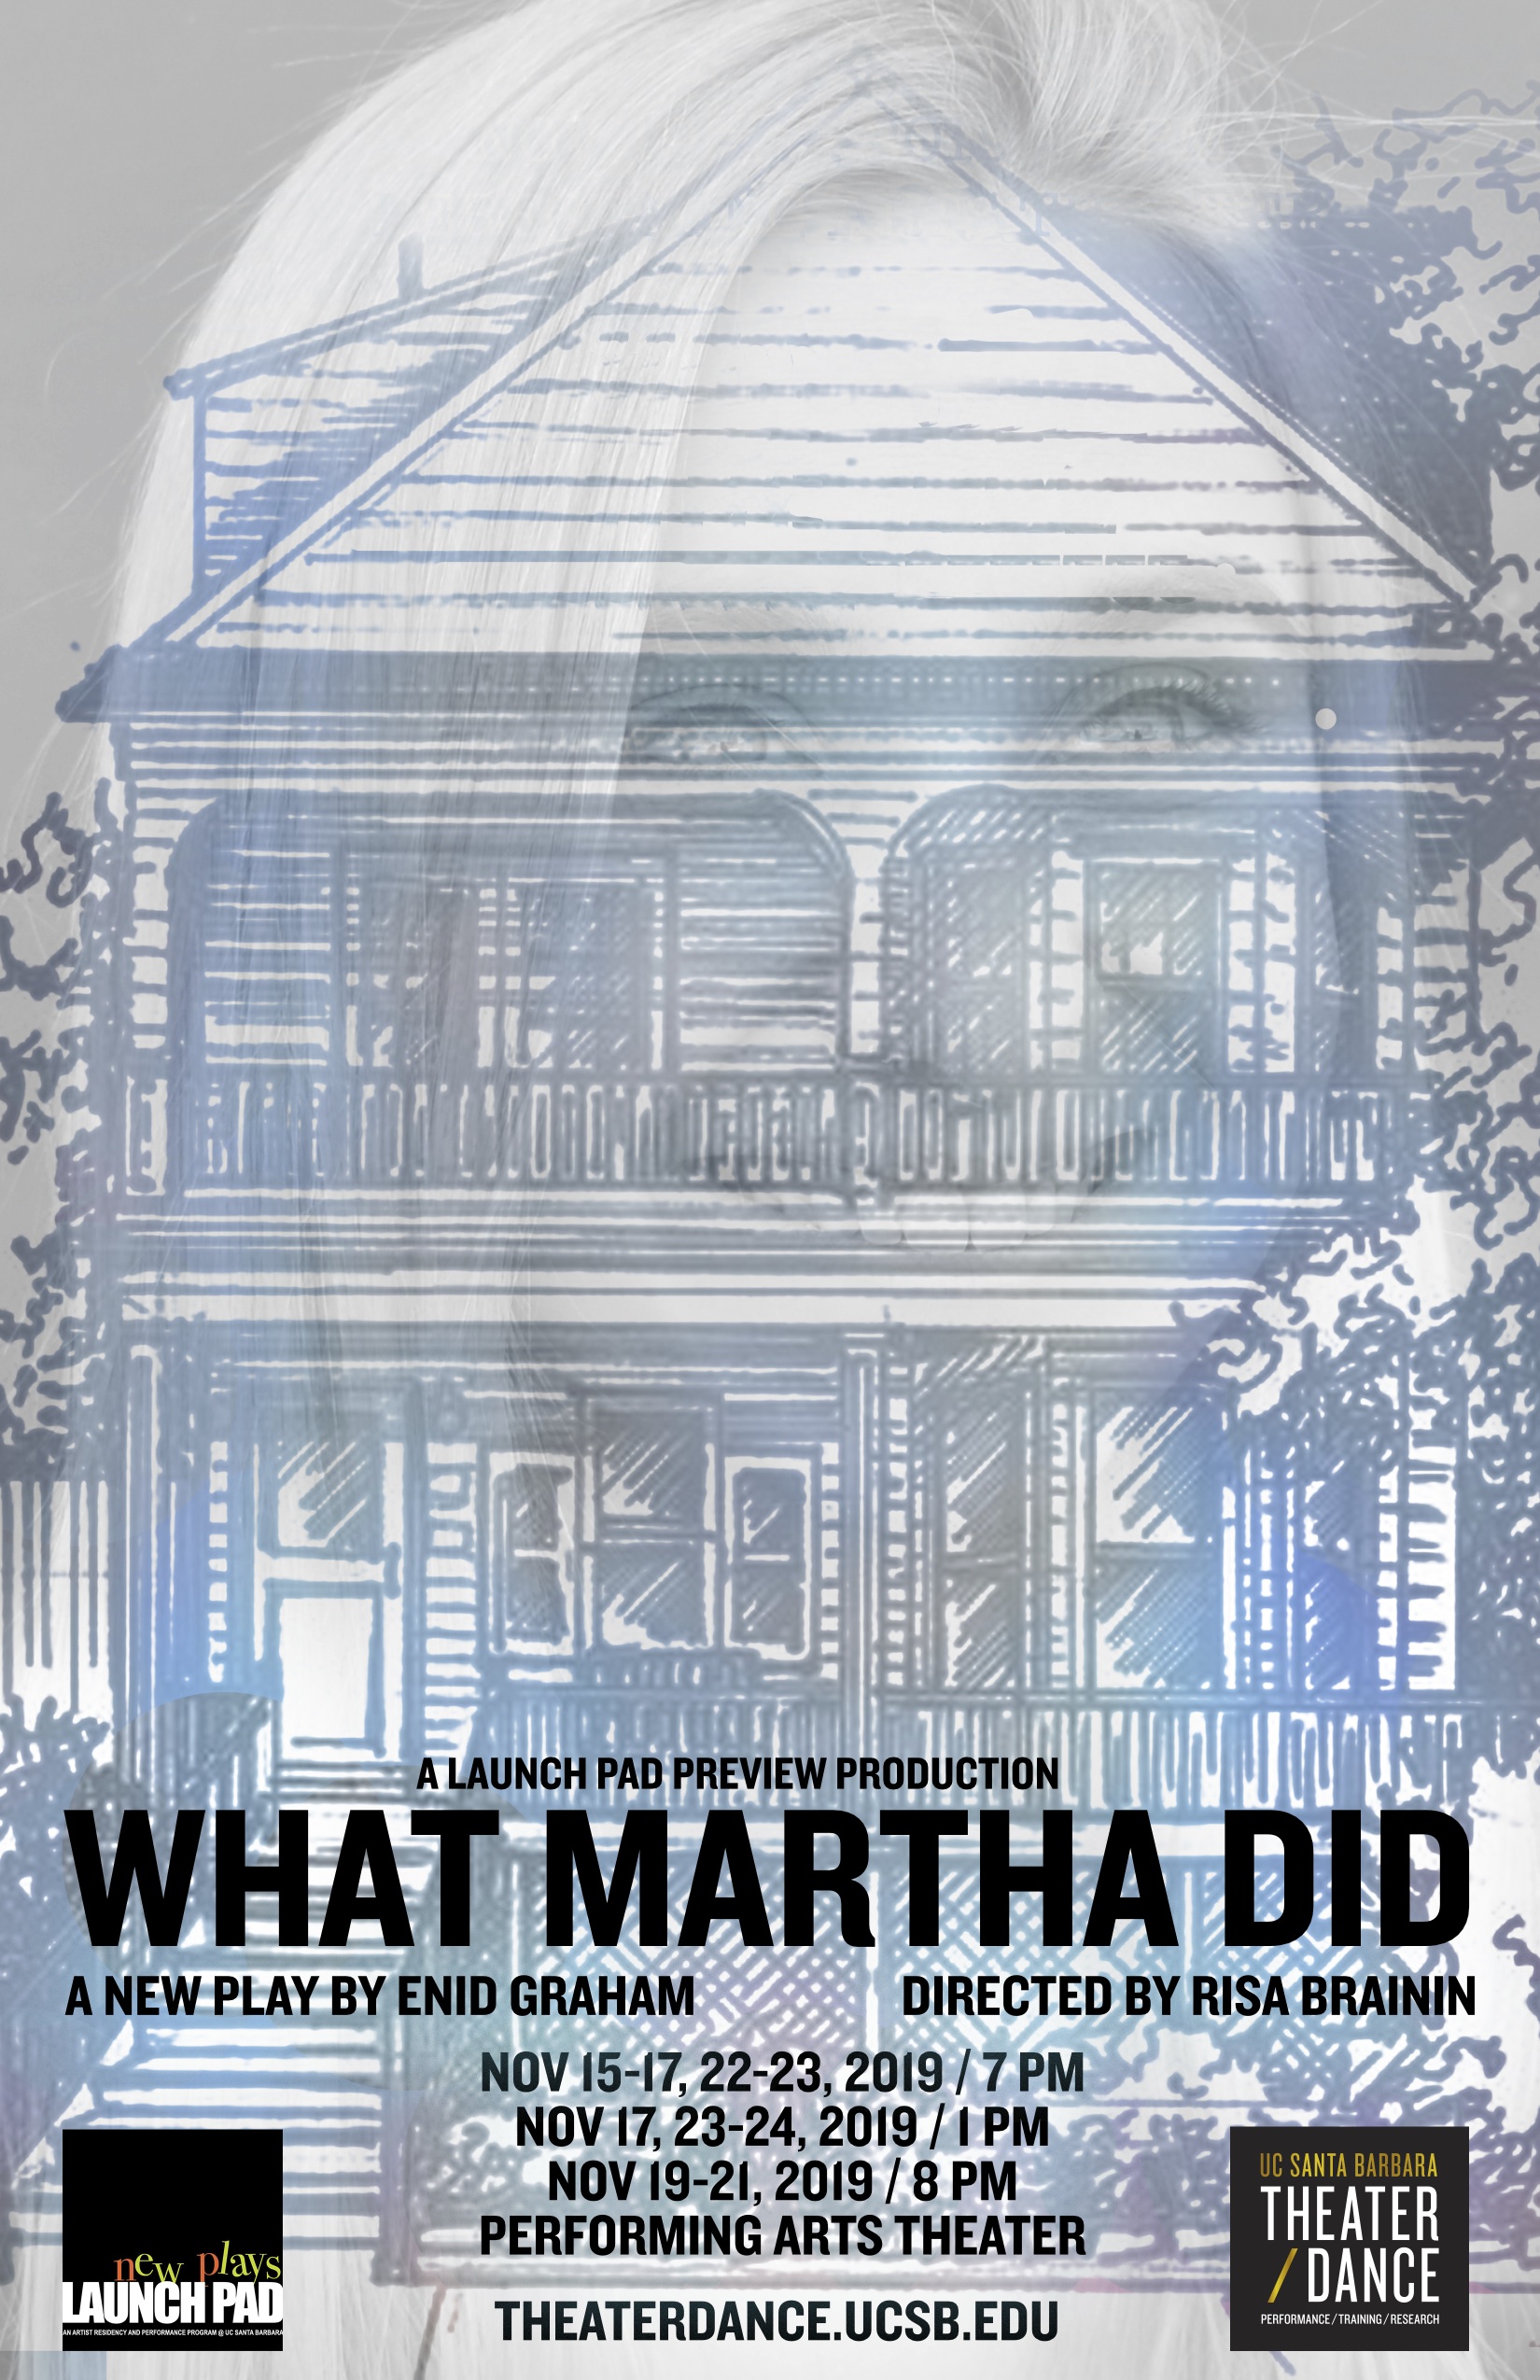 poster for Enid Graham's play What Martha Did; a house with a girl's face superimposed